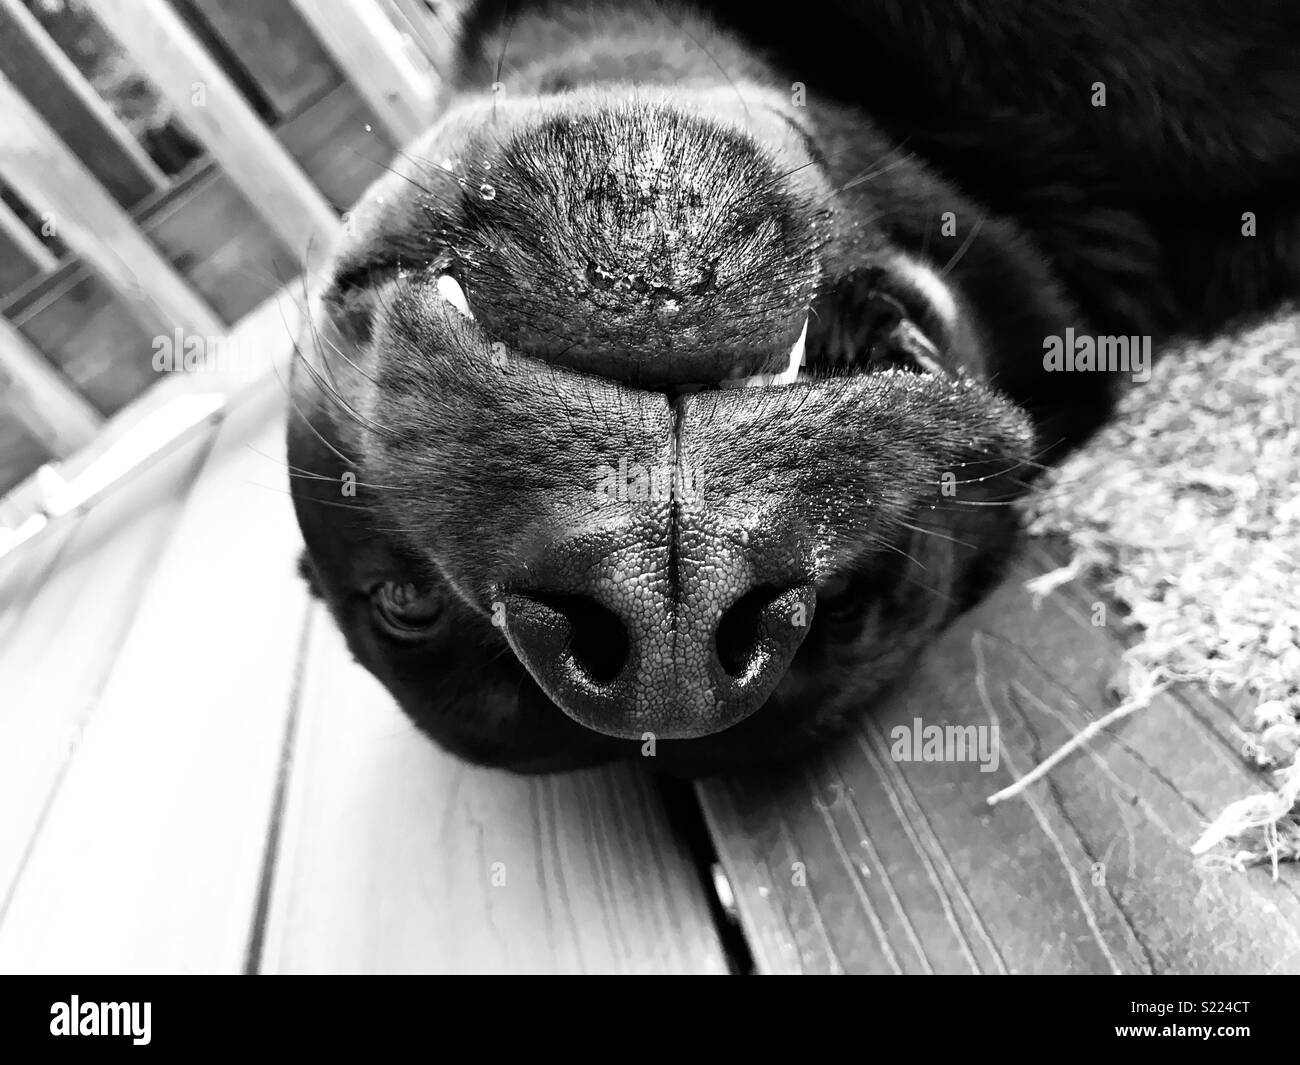 Rottweiler being silly Stock Photo